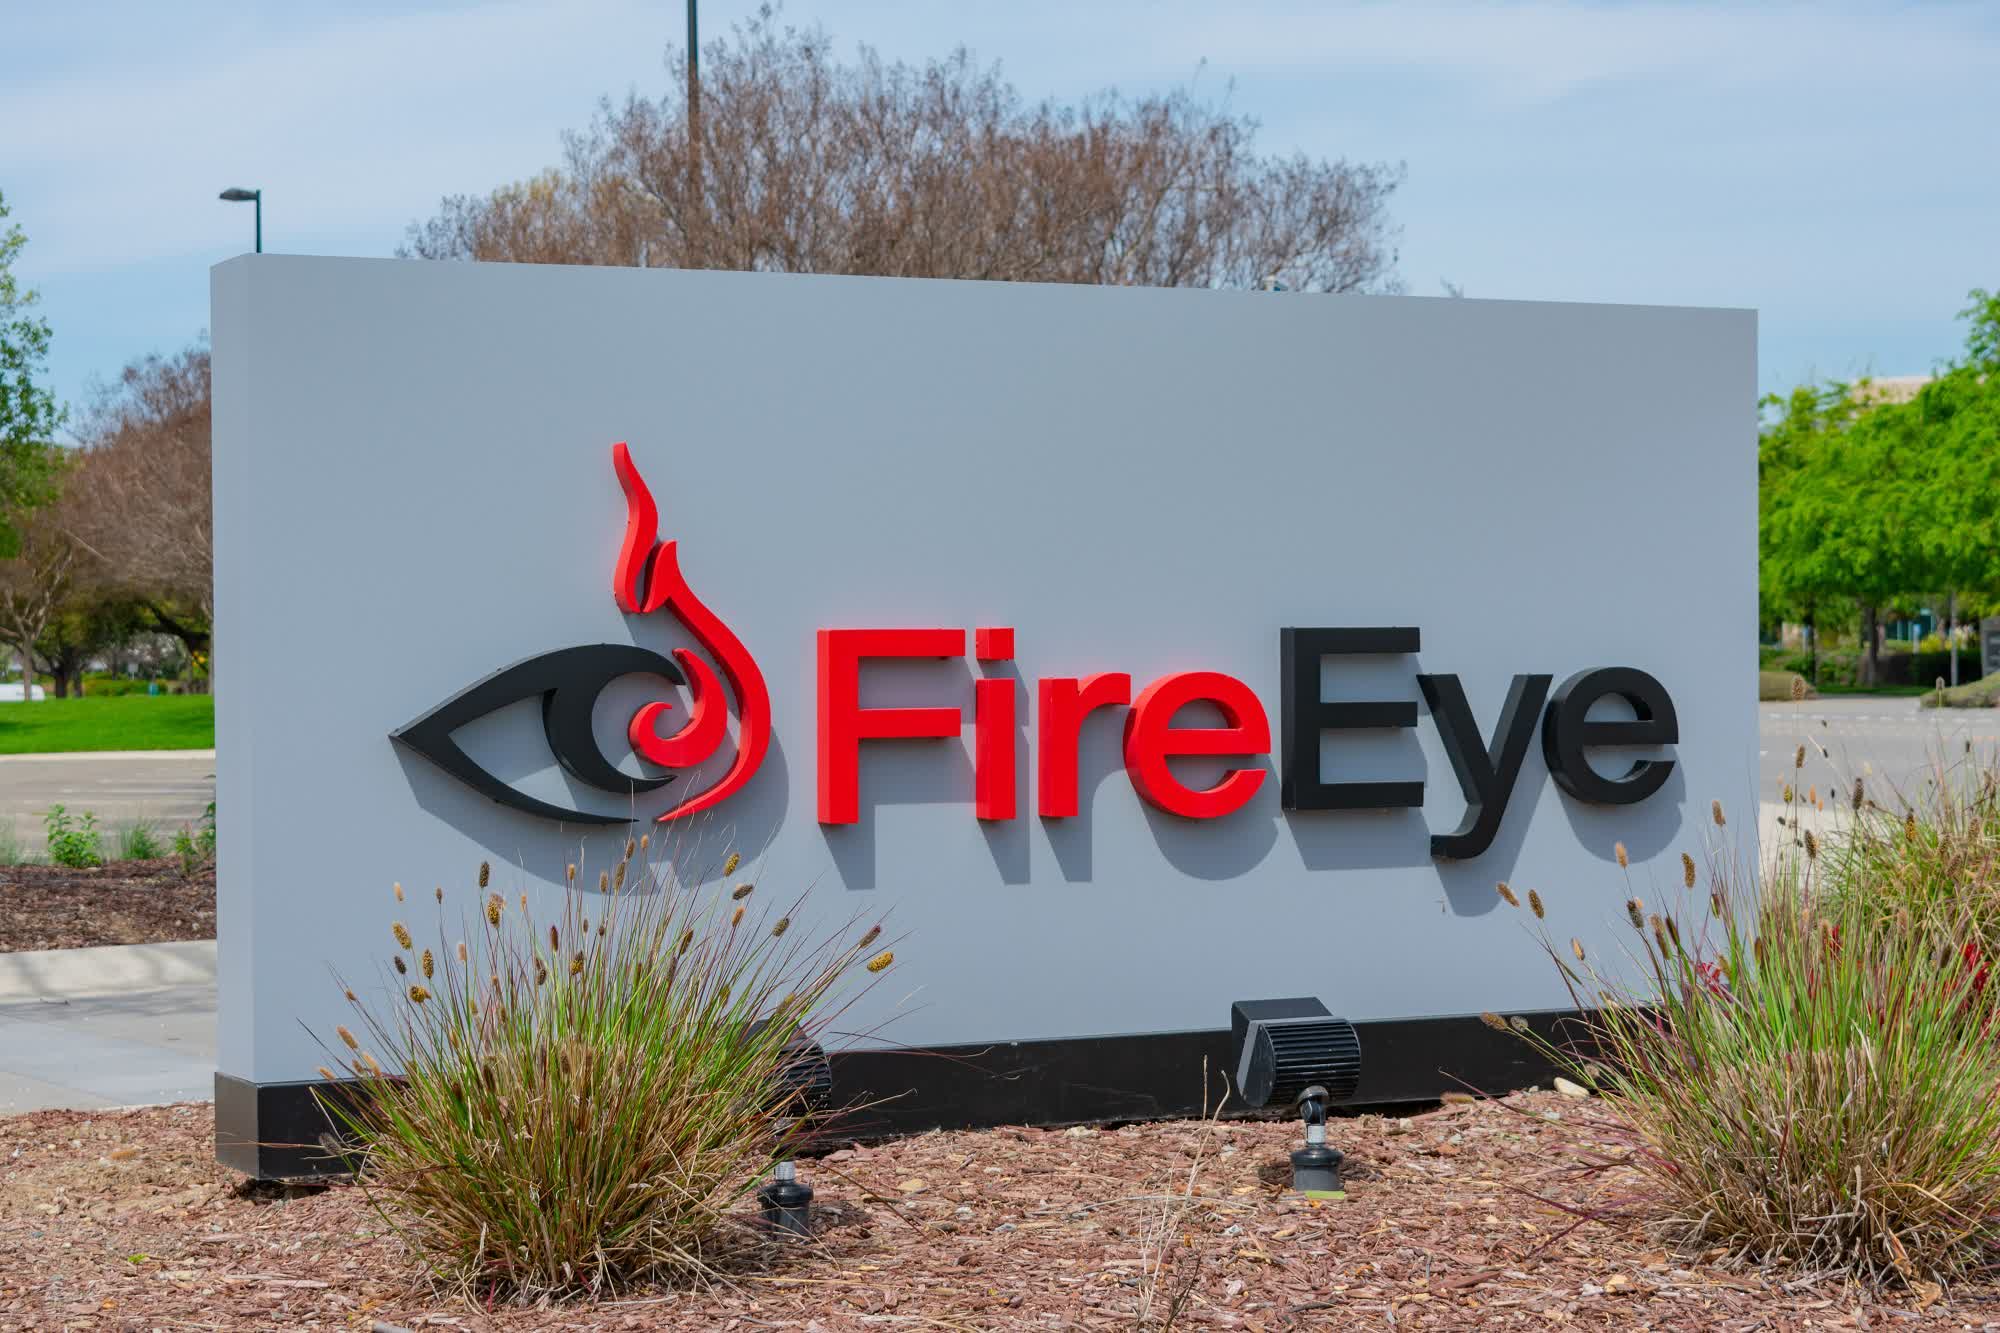 Cybersecurity giant FireEye hacked by nation-state, likely Russia